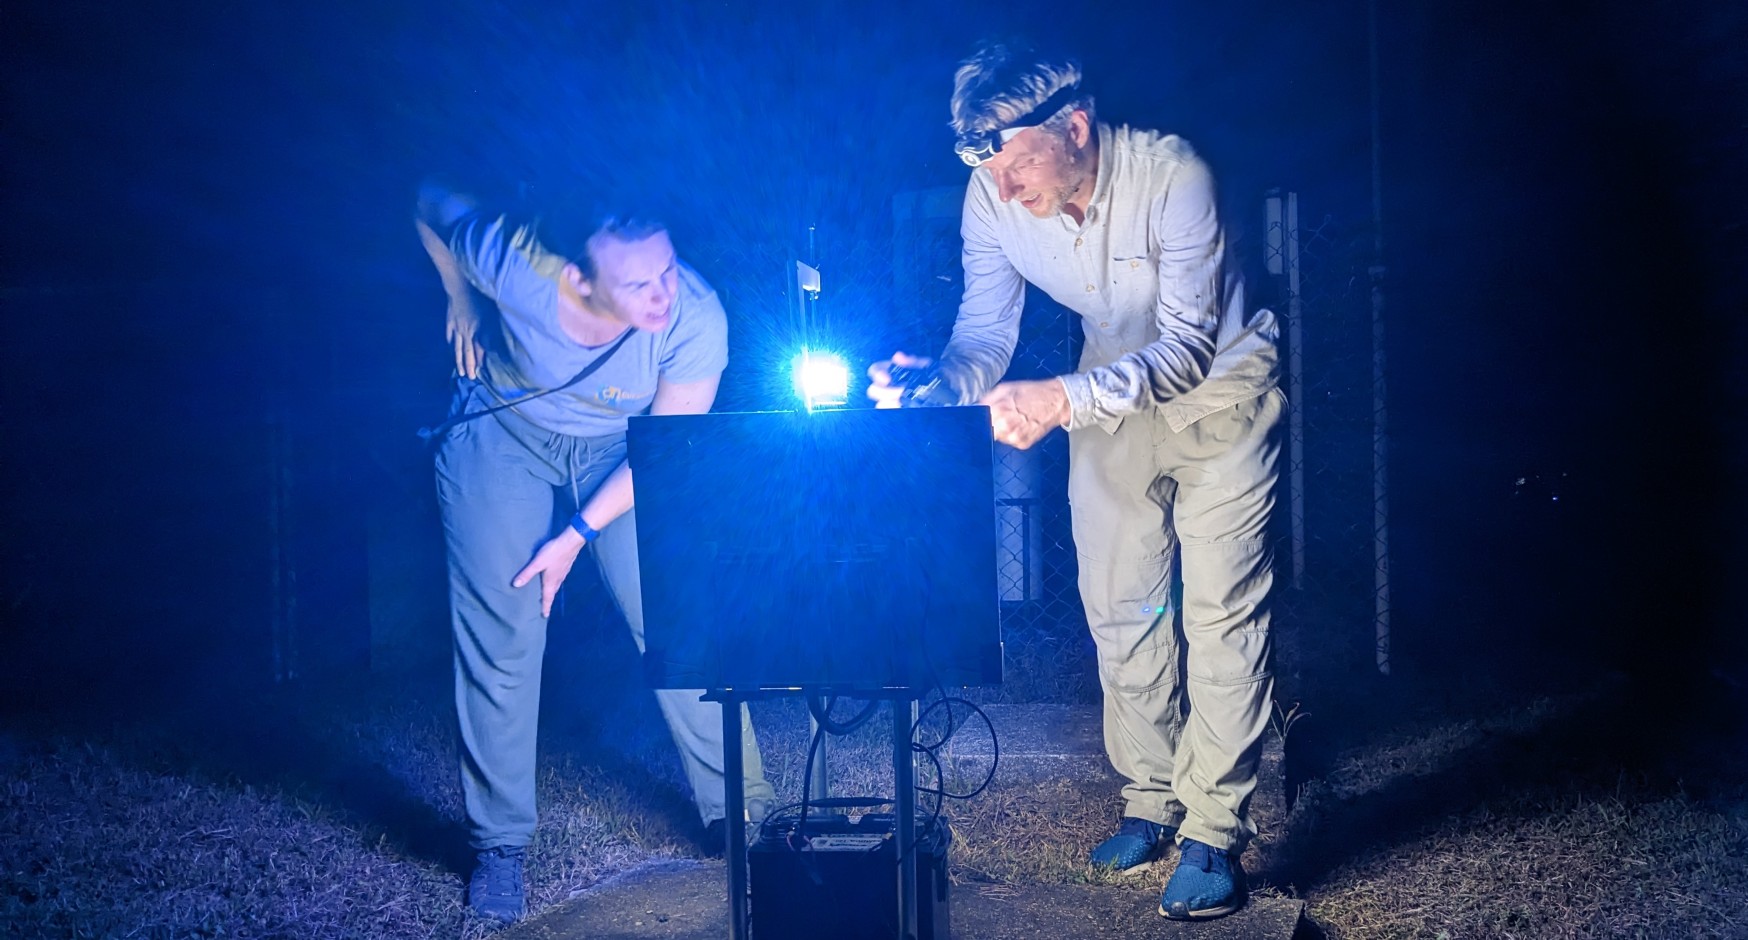 Two people with torches examining computer equipment at night